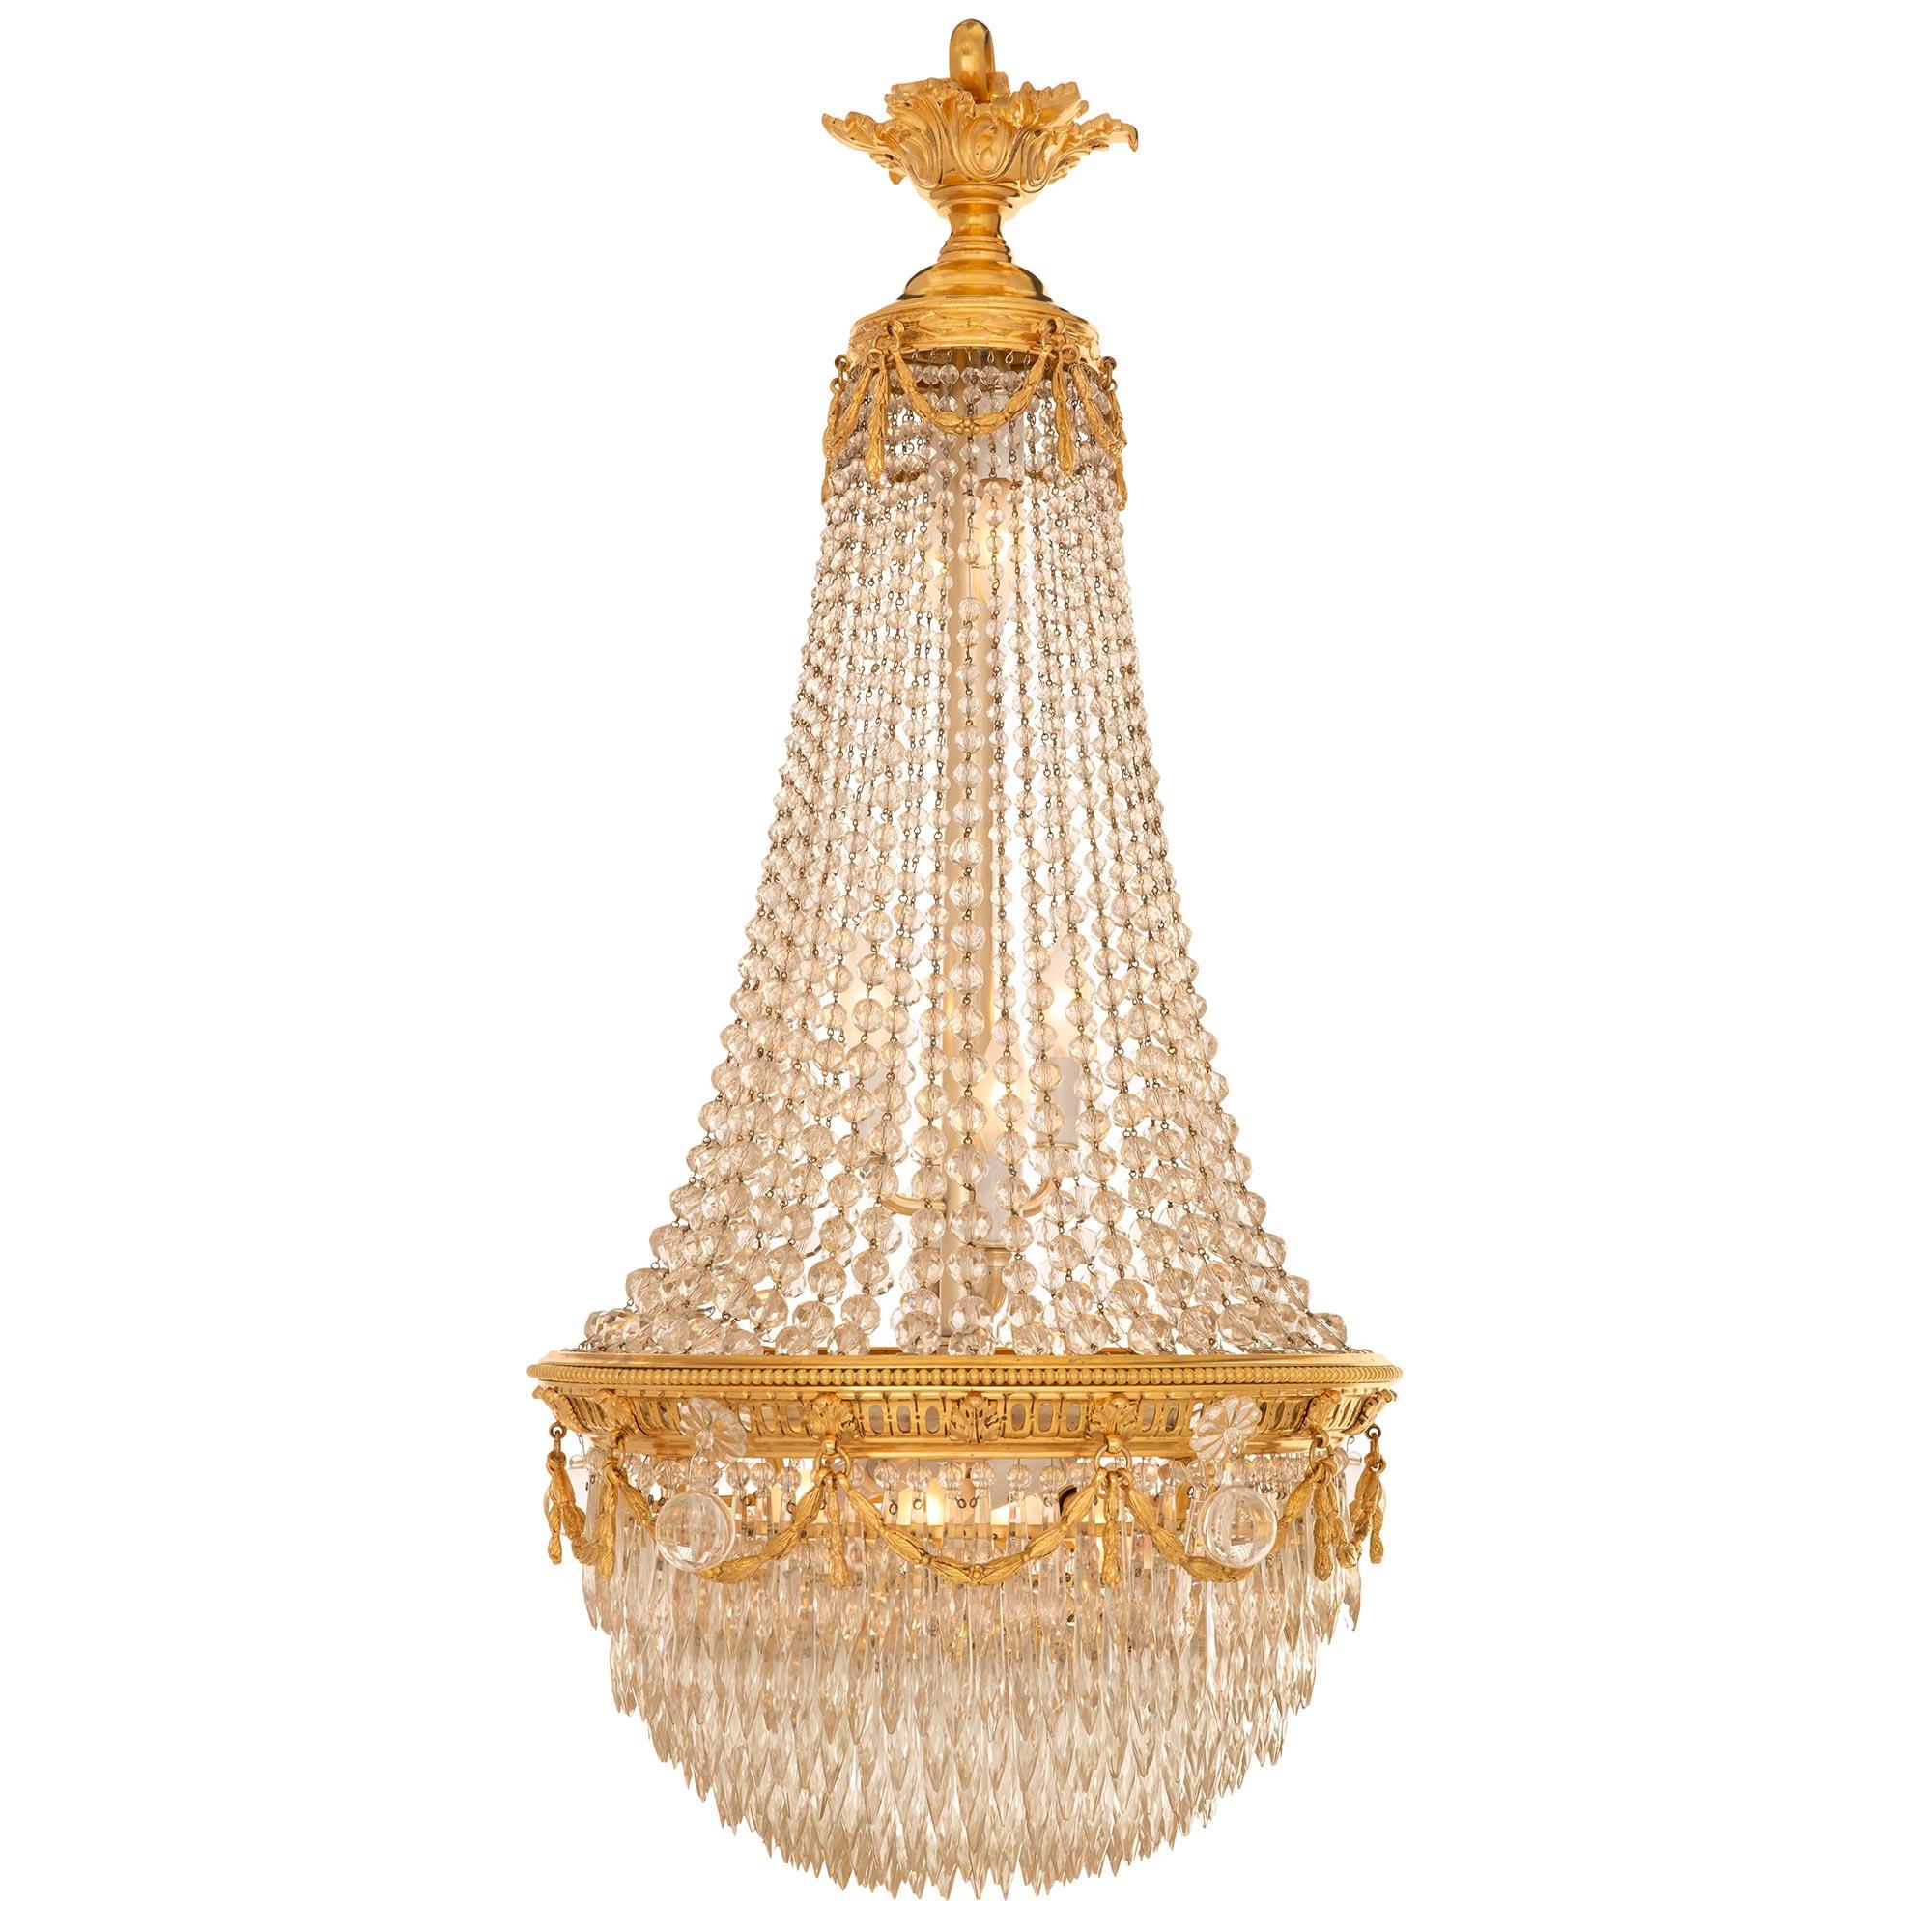 A beautiful and most elegant French 19th century Louis XVI st. Baccarat crystal, cut glass, and ormolu chandelier. The eleven bulb chandelier displays a graceful montgolfière shape with a most decorative dome shaped array of prism shaped cut crystal